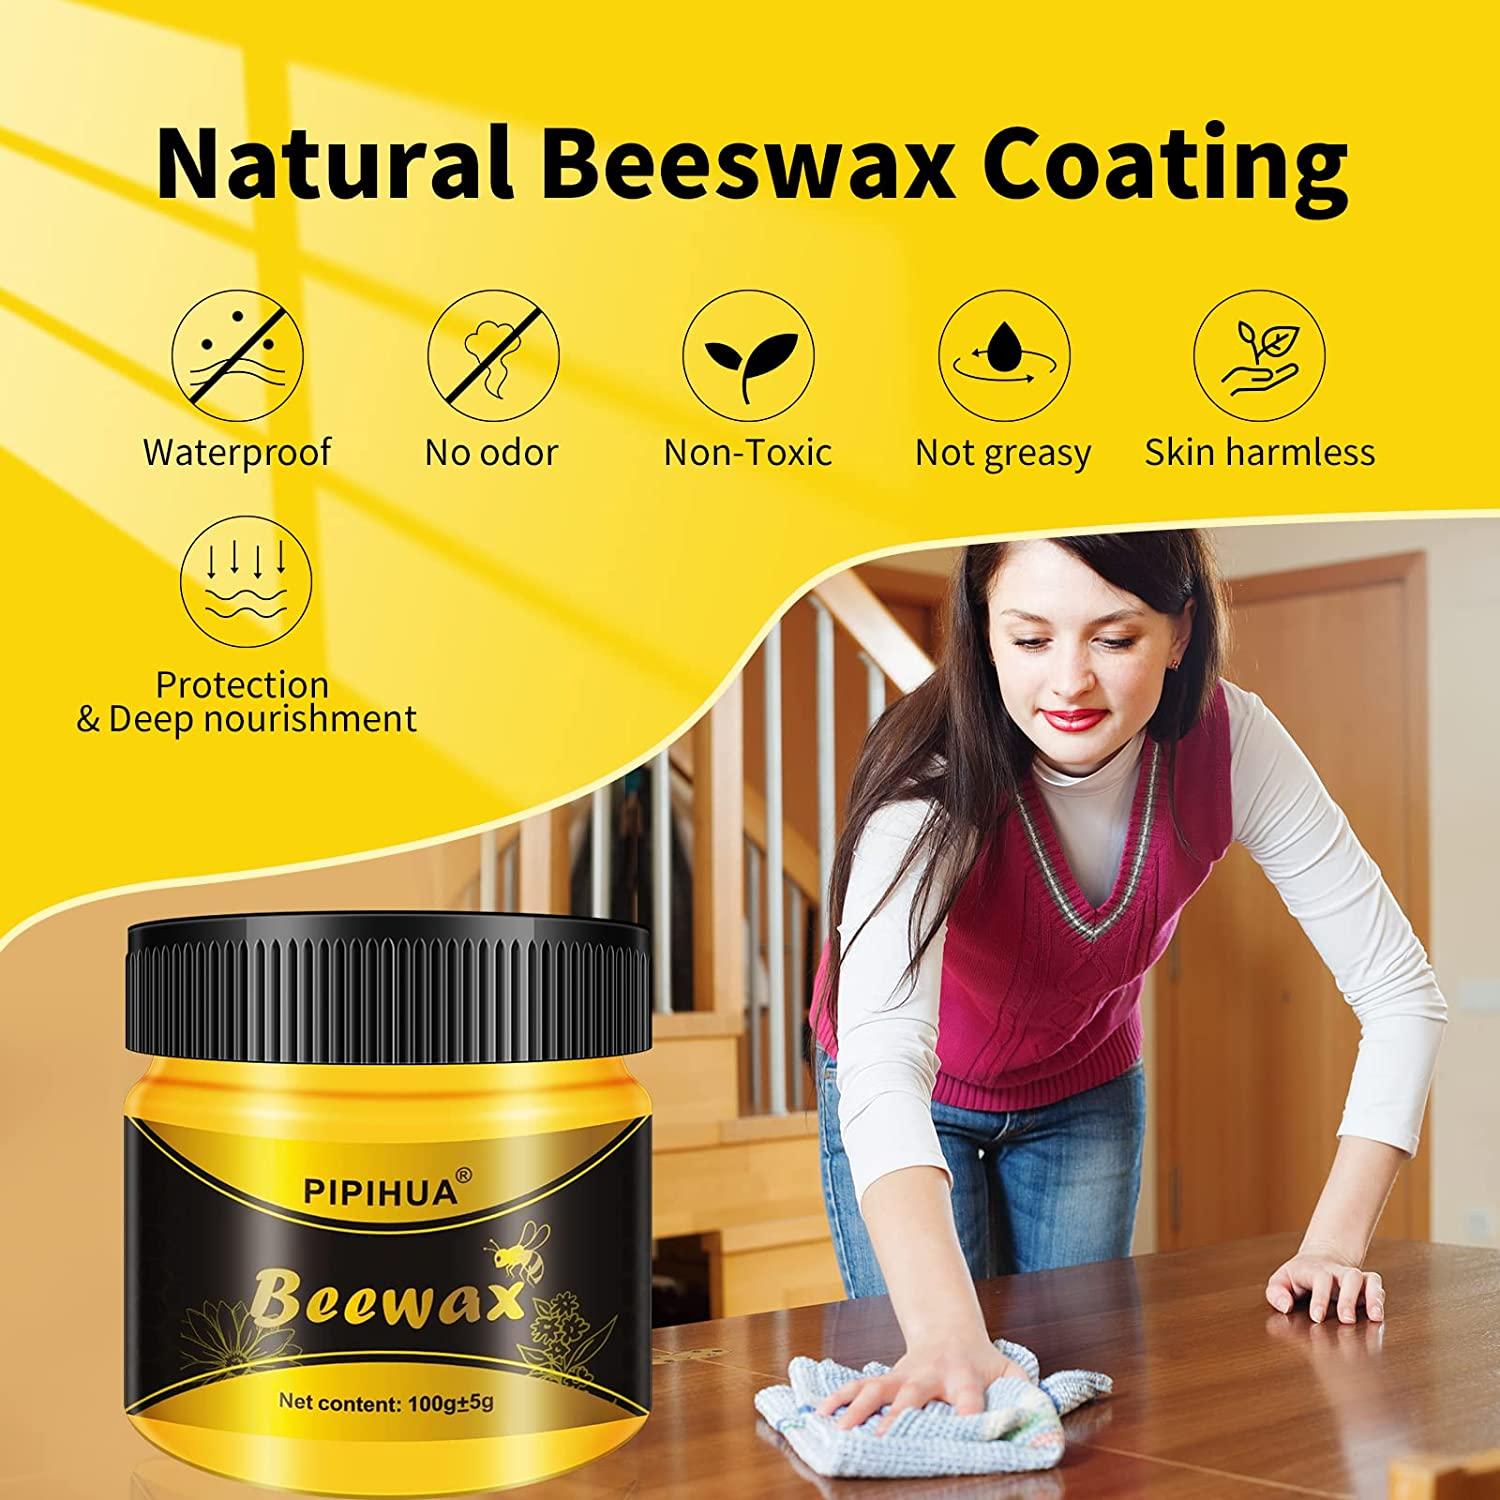 PIPIHUA Beeswax Furniture Polish, Wood Seasoning Beeswax for Furniture  Waterproof & Repair Wood Wax for Floors Cabinets to Protect & Care, 2pcs  Beeswax Polish with 4pcs Sponges